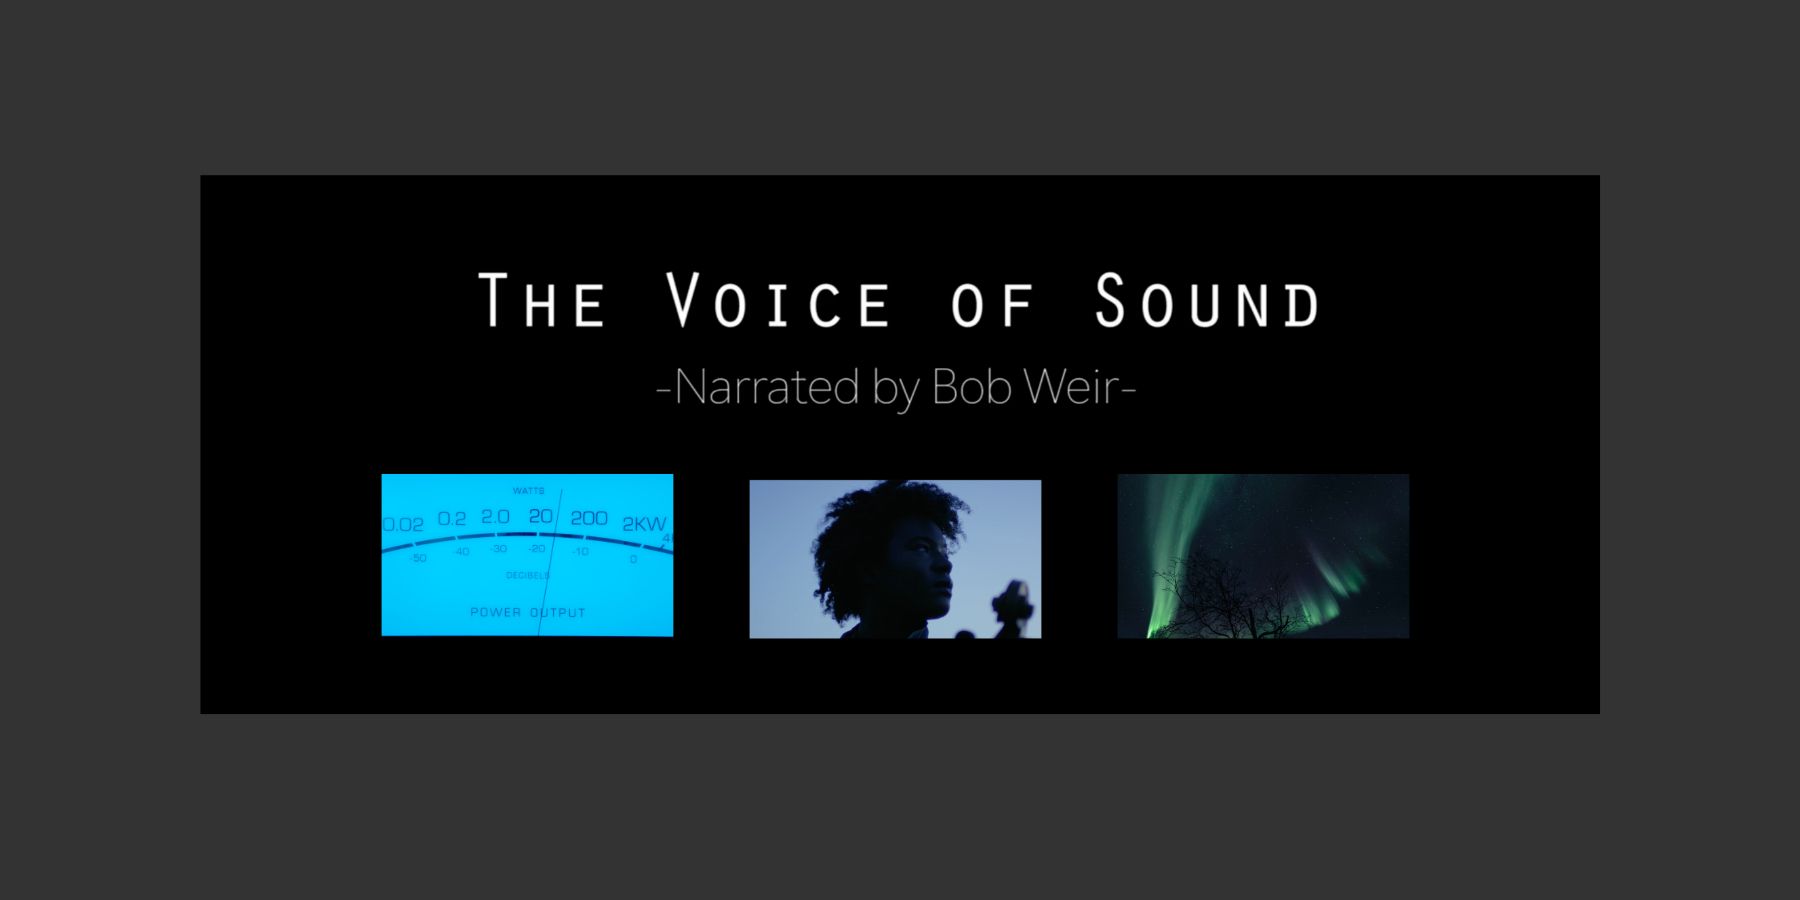 McIntosh, The Voice of Sound - Narrated by Bob Weir